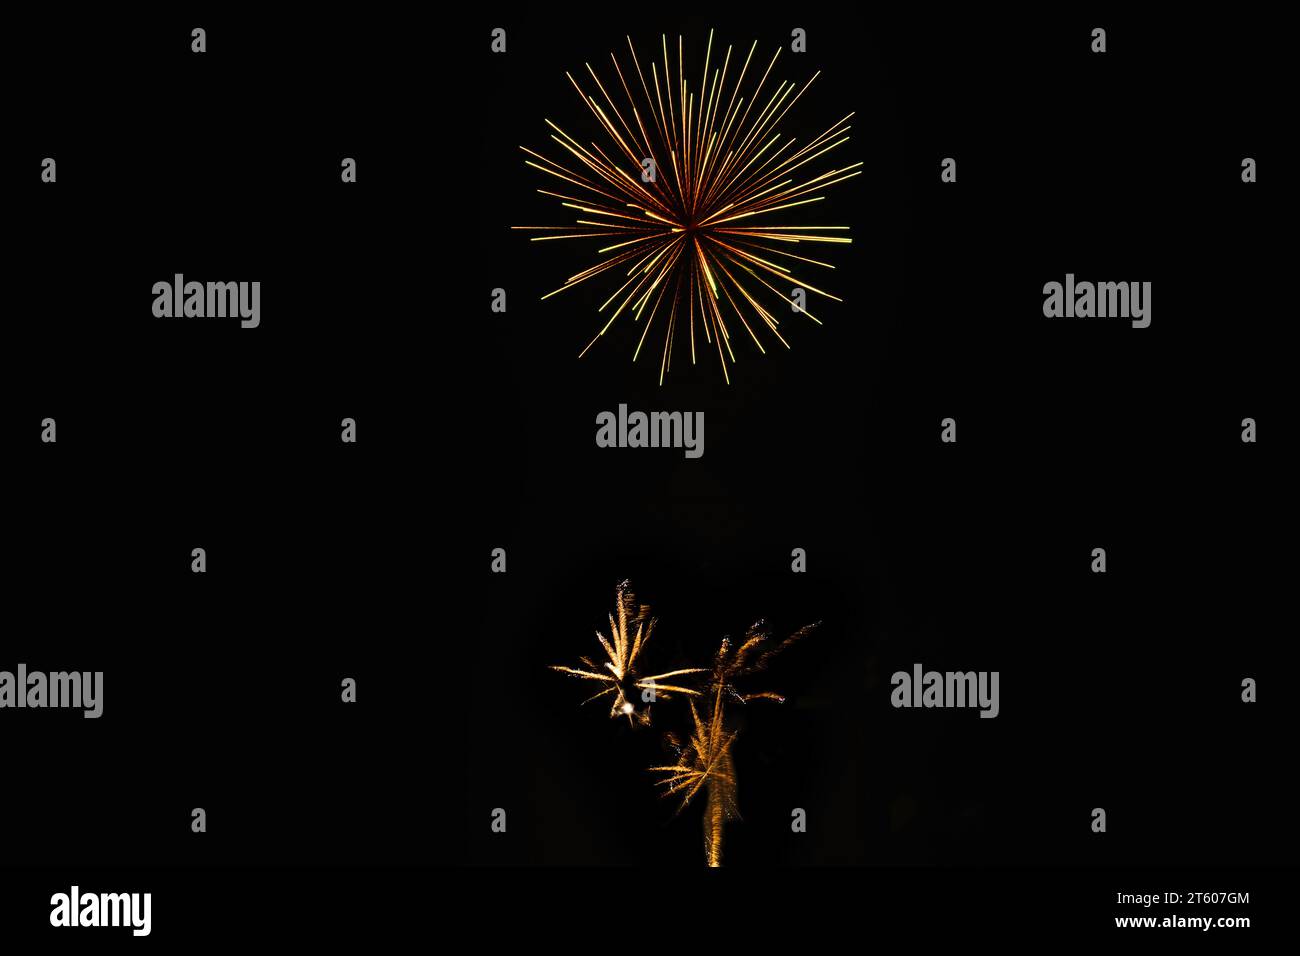 New Year's Night, Diwali, bonfire night Starbursts and Rocket Explosions on Black Background Sky with Red, Green, Blue, Purple, Gold Colour fireworks Stock Photo